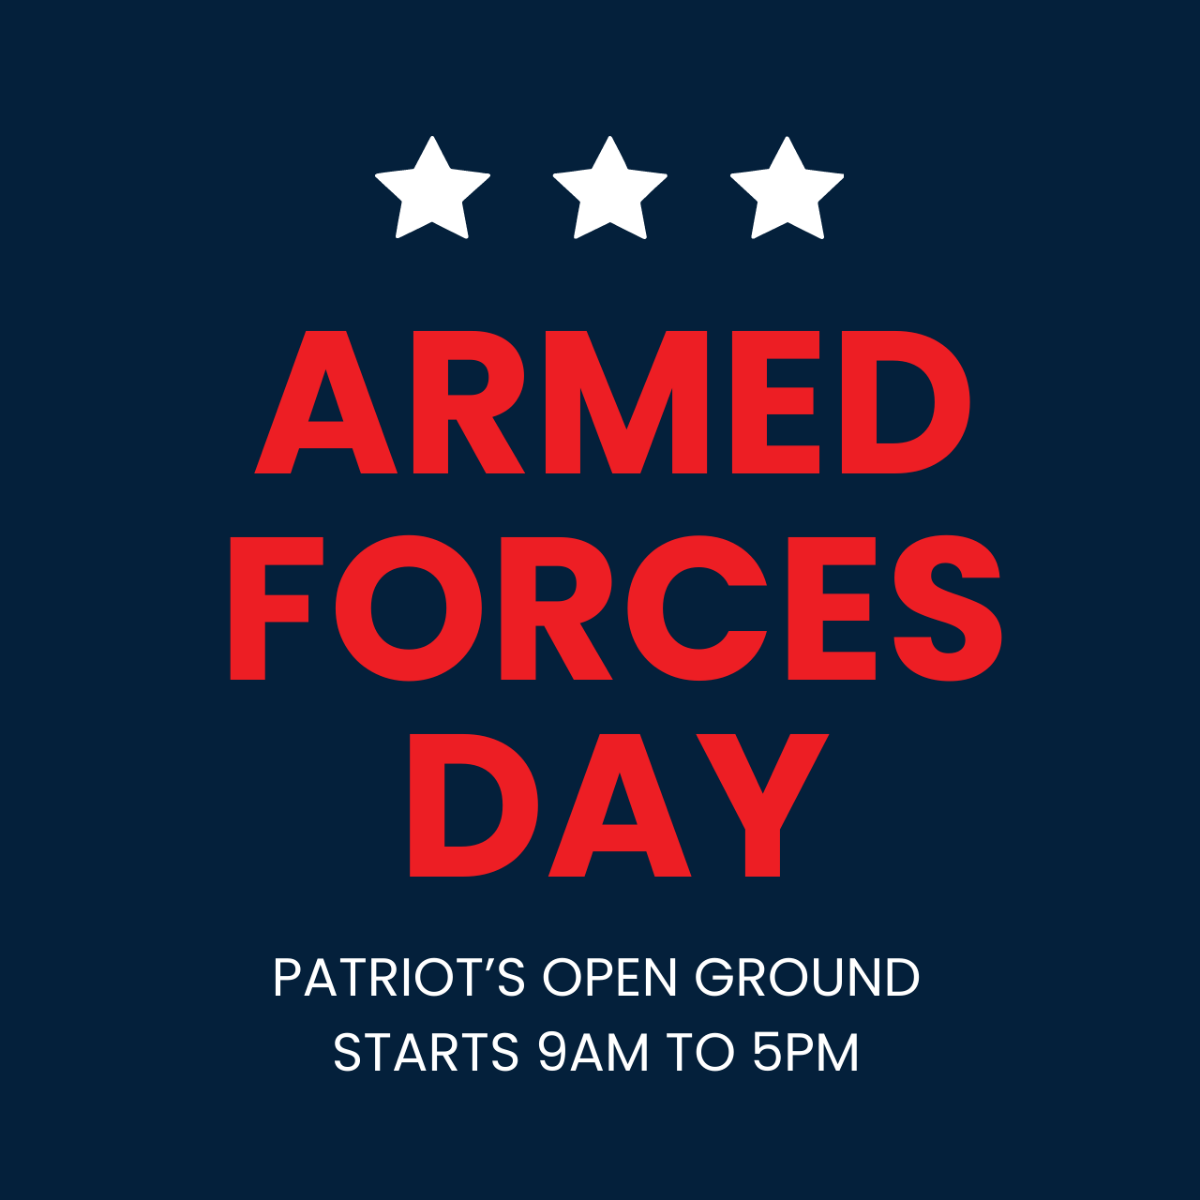 Free Armed Forces Day Tumblr Profile Photo Template